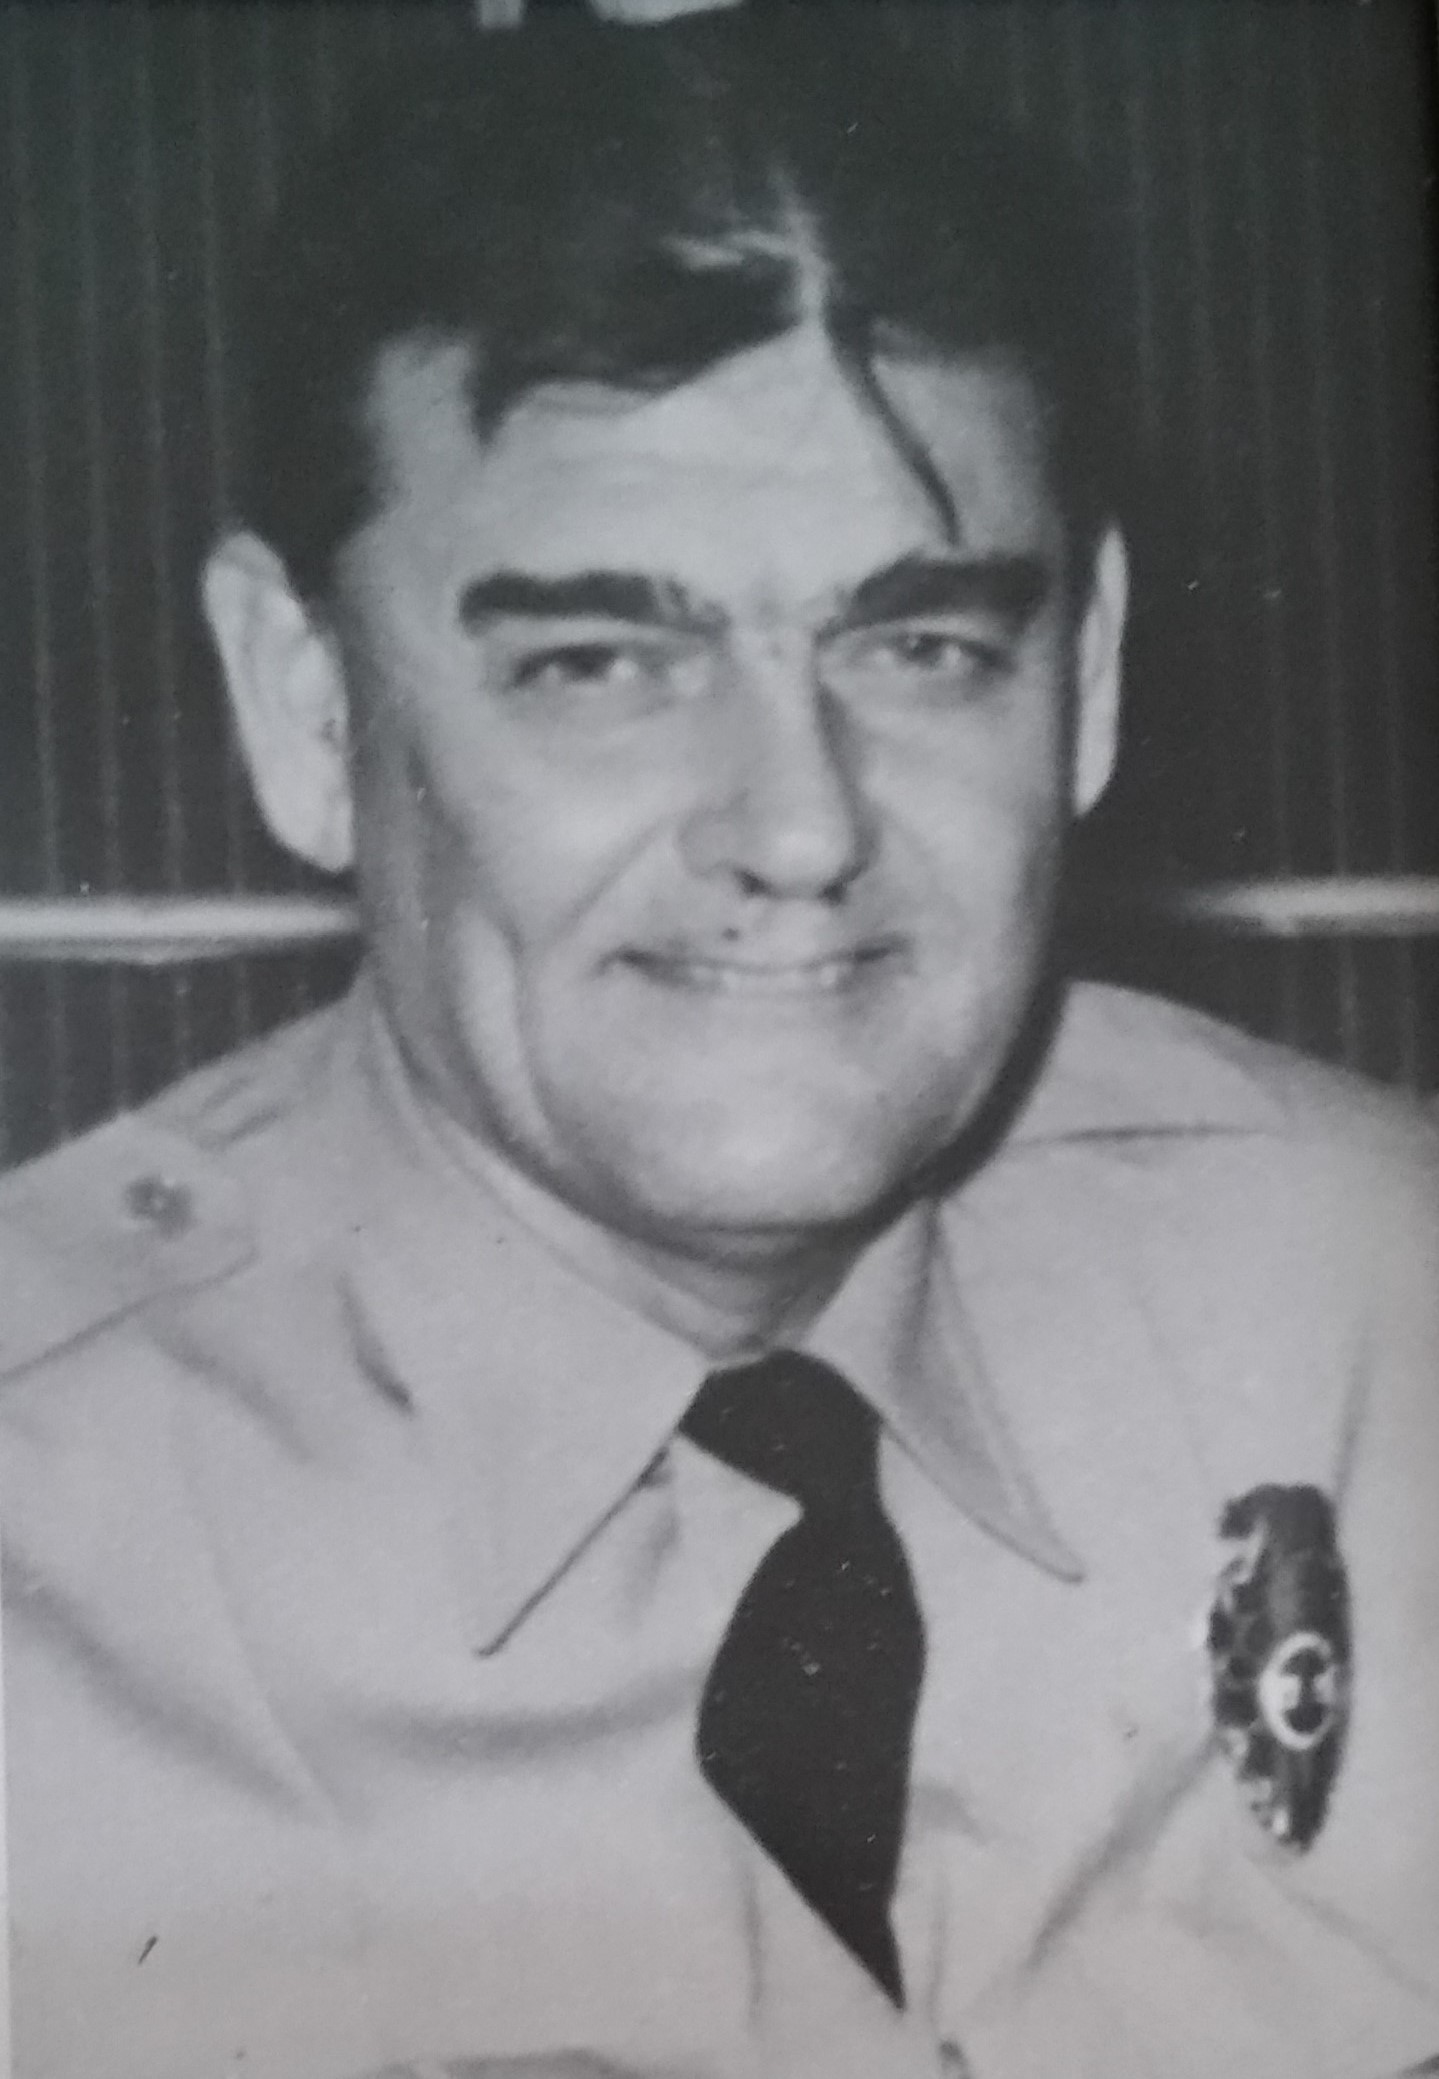 Officer Murray F. Olsen | Los Angeles County Department of Health Services, California